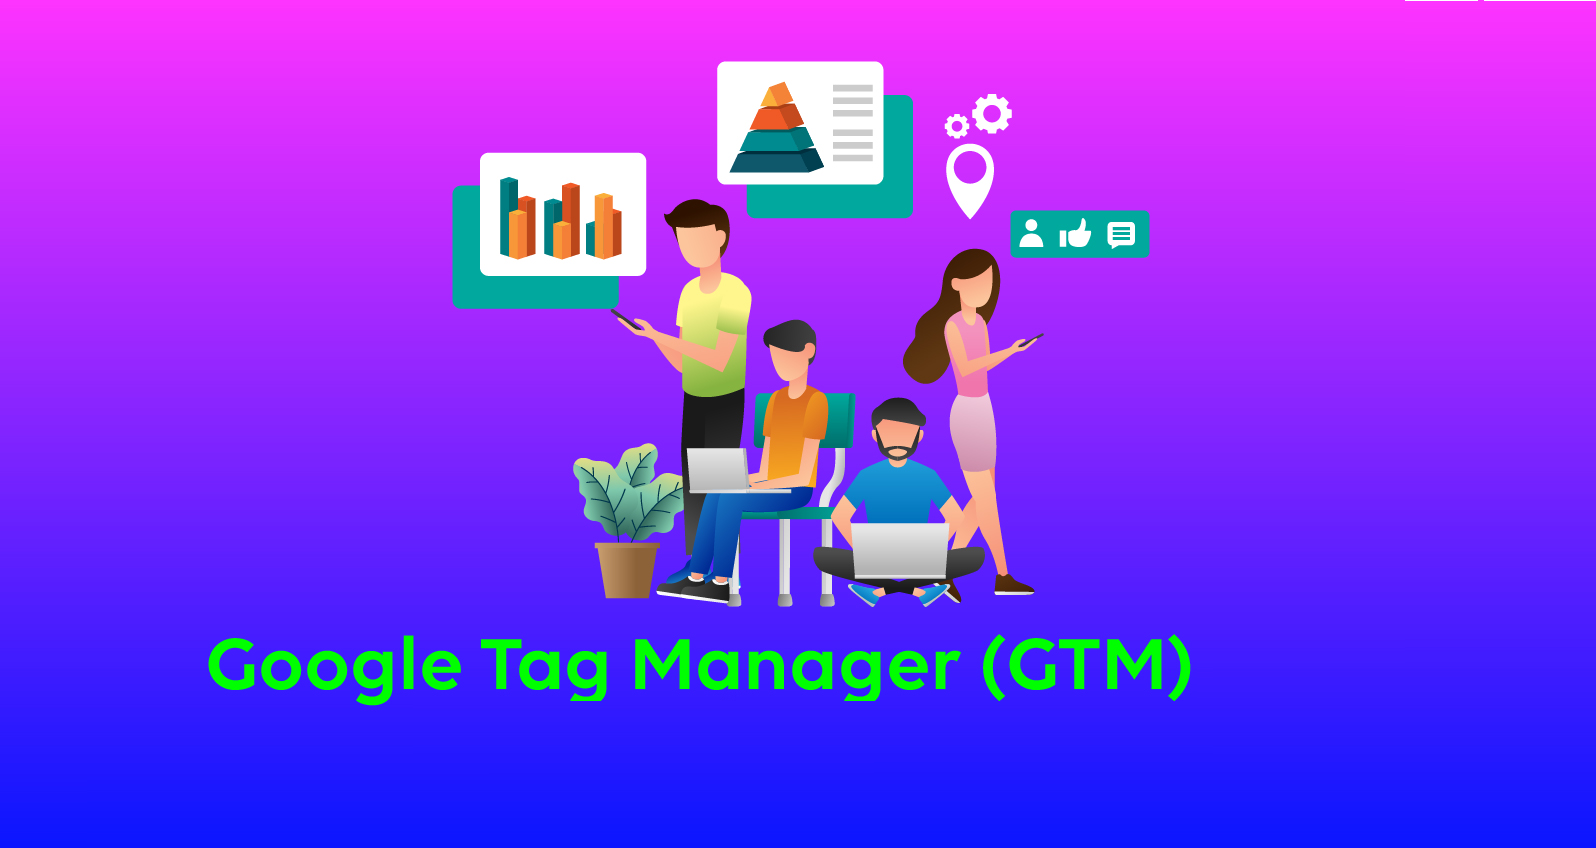 GTM uses